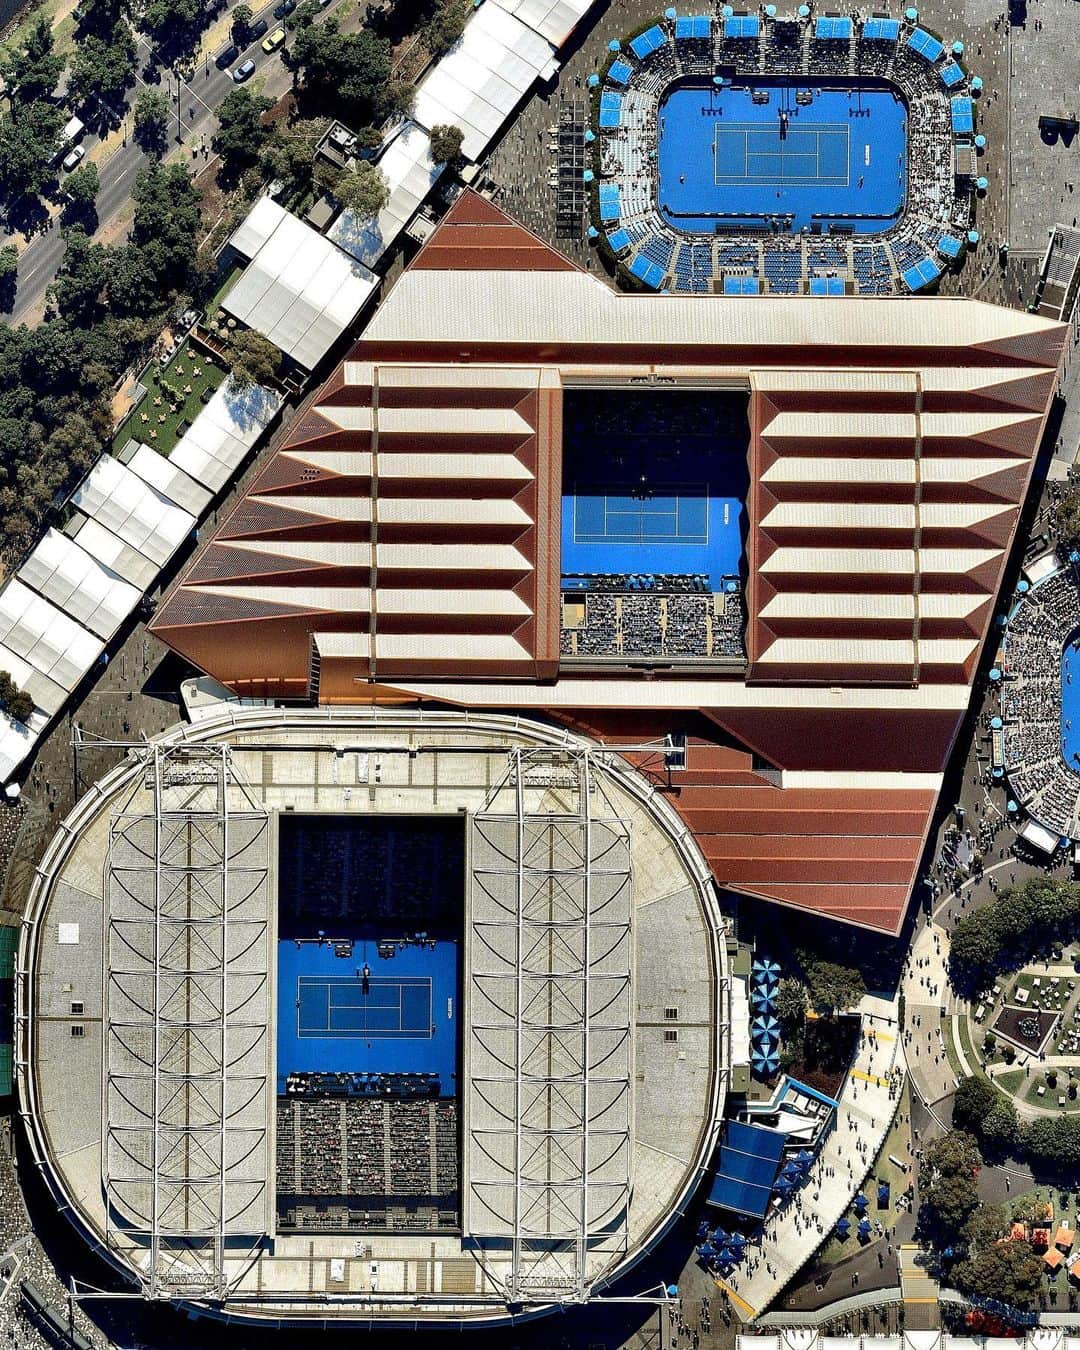 Daily Overviewのインスタグラム：「Melbourne Park in Melbourne, Australia, has been the home of the Australian Open tennis tournament since 1988. Held annually during the last two weeks of January (though later this year due to COVID-19), the tournament is the first of the four Grand Slam tennis events, preceding the French Open, Wimbledon and the US Open. Today, Naomi Osaka clinched the women’s singles title over Jennifer Brady, and tomorrow Novak Djokovic will face off against Daniil Medvedev in the men’s singles final. — Created by @overview Source imagery: @nearmap」